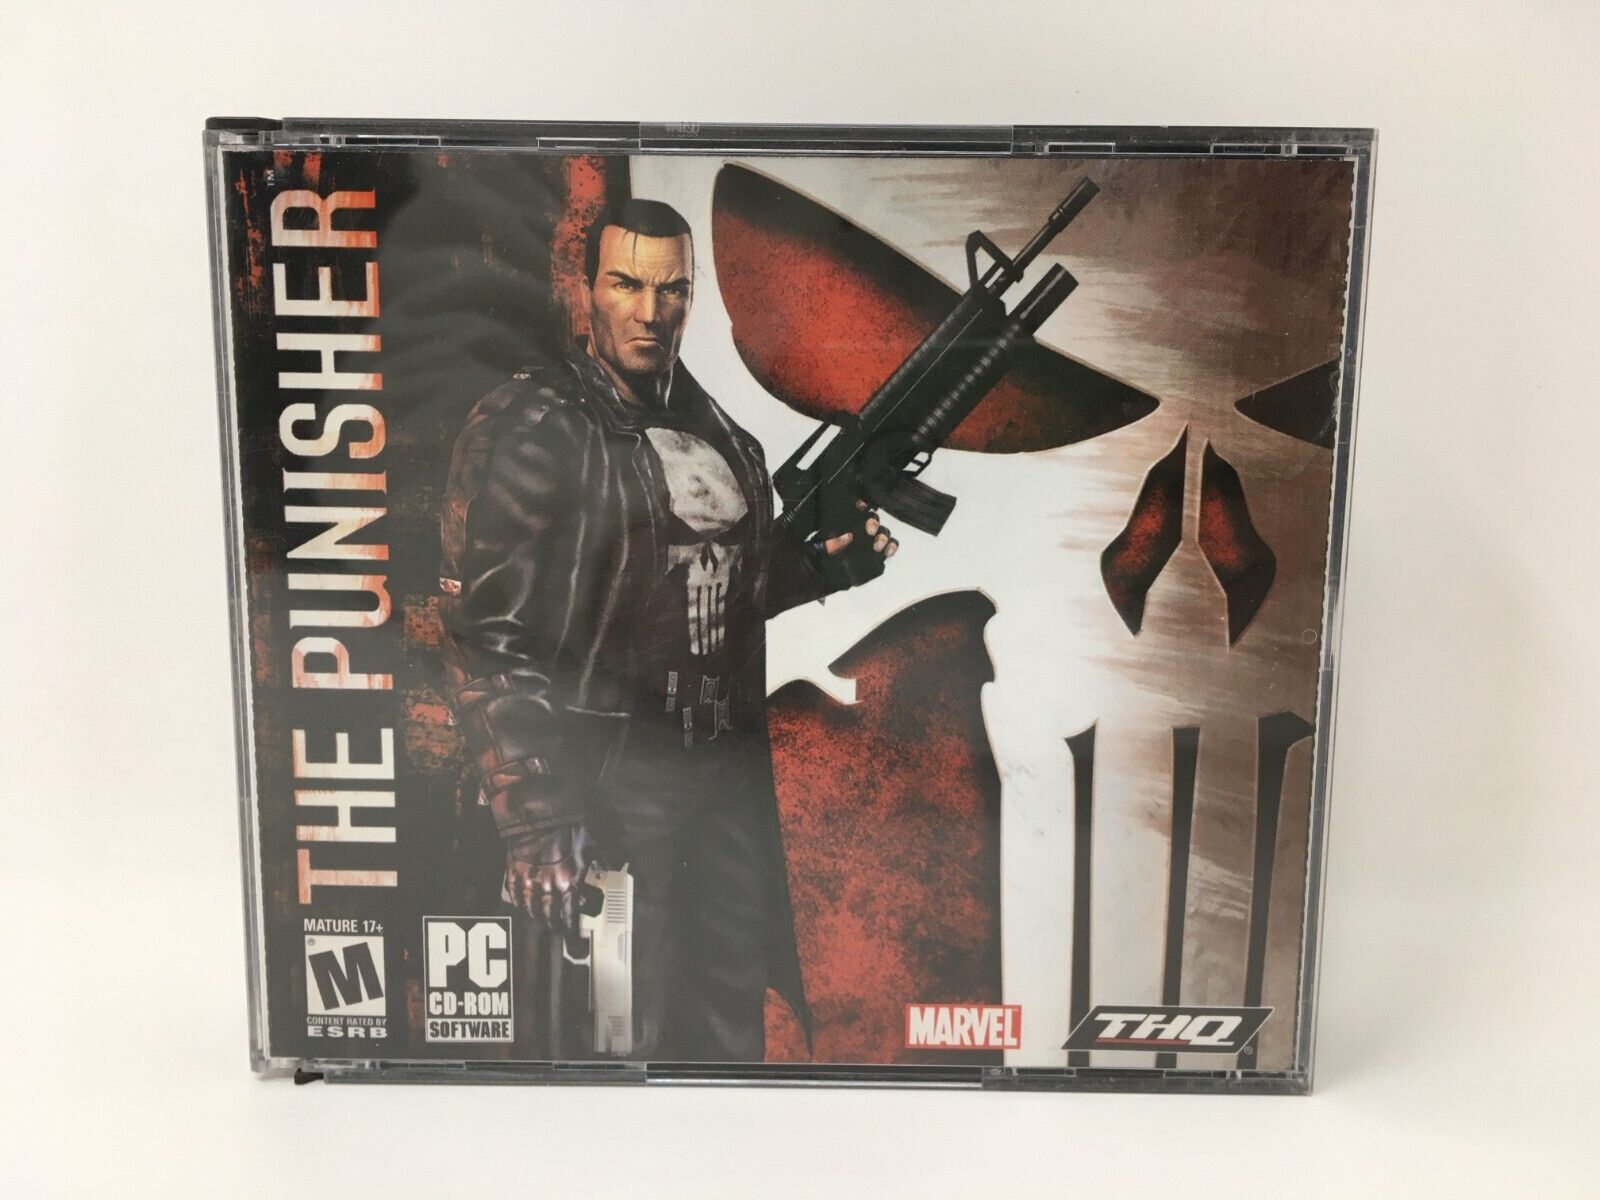 The Punisher Game for PC CD-ROM 3 Disc Set Marvel THQ - 2005 - No Manual